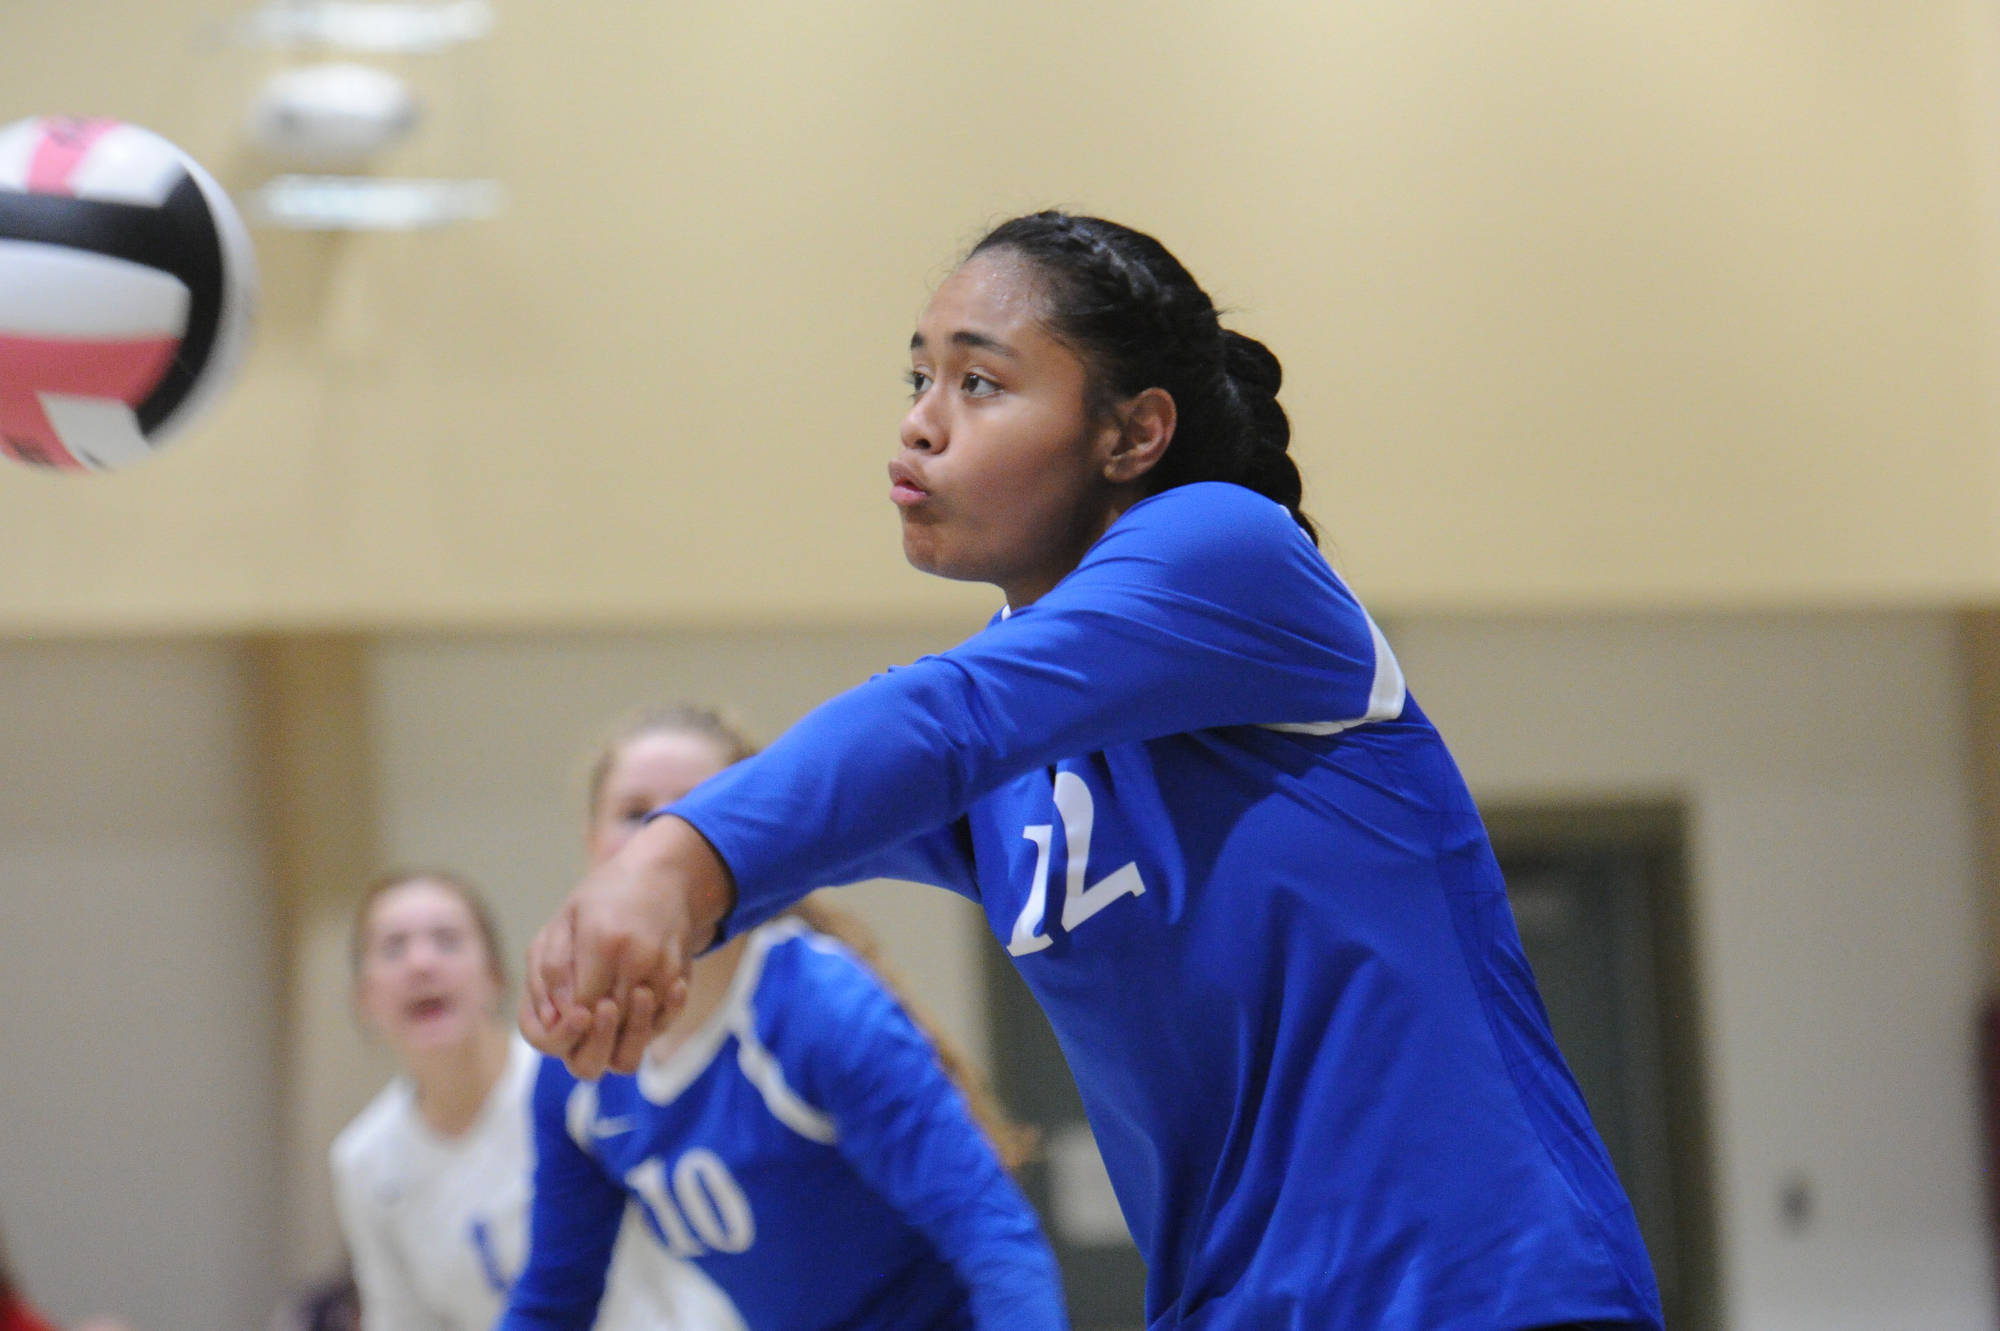 Thunder Mountain sophomore outside hitter Mariah Tanuvasa-Tuvaifale sets for a return shot against West Valley in the Dimond-Service Tournament at Dimond High School in Anchorage on Friday. Thunder Mountain 25-22 and 25-21. (Michael Dinneen | For the Juneau Empire)